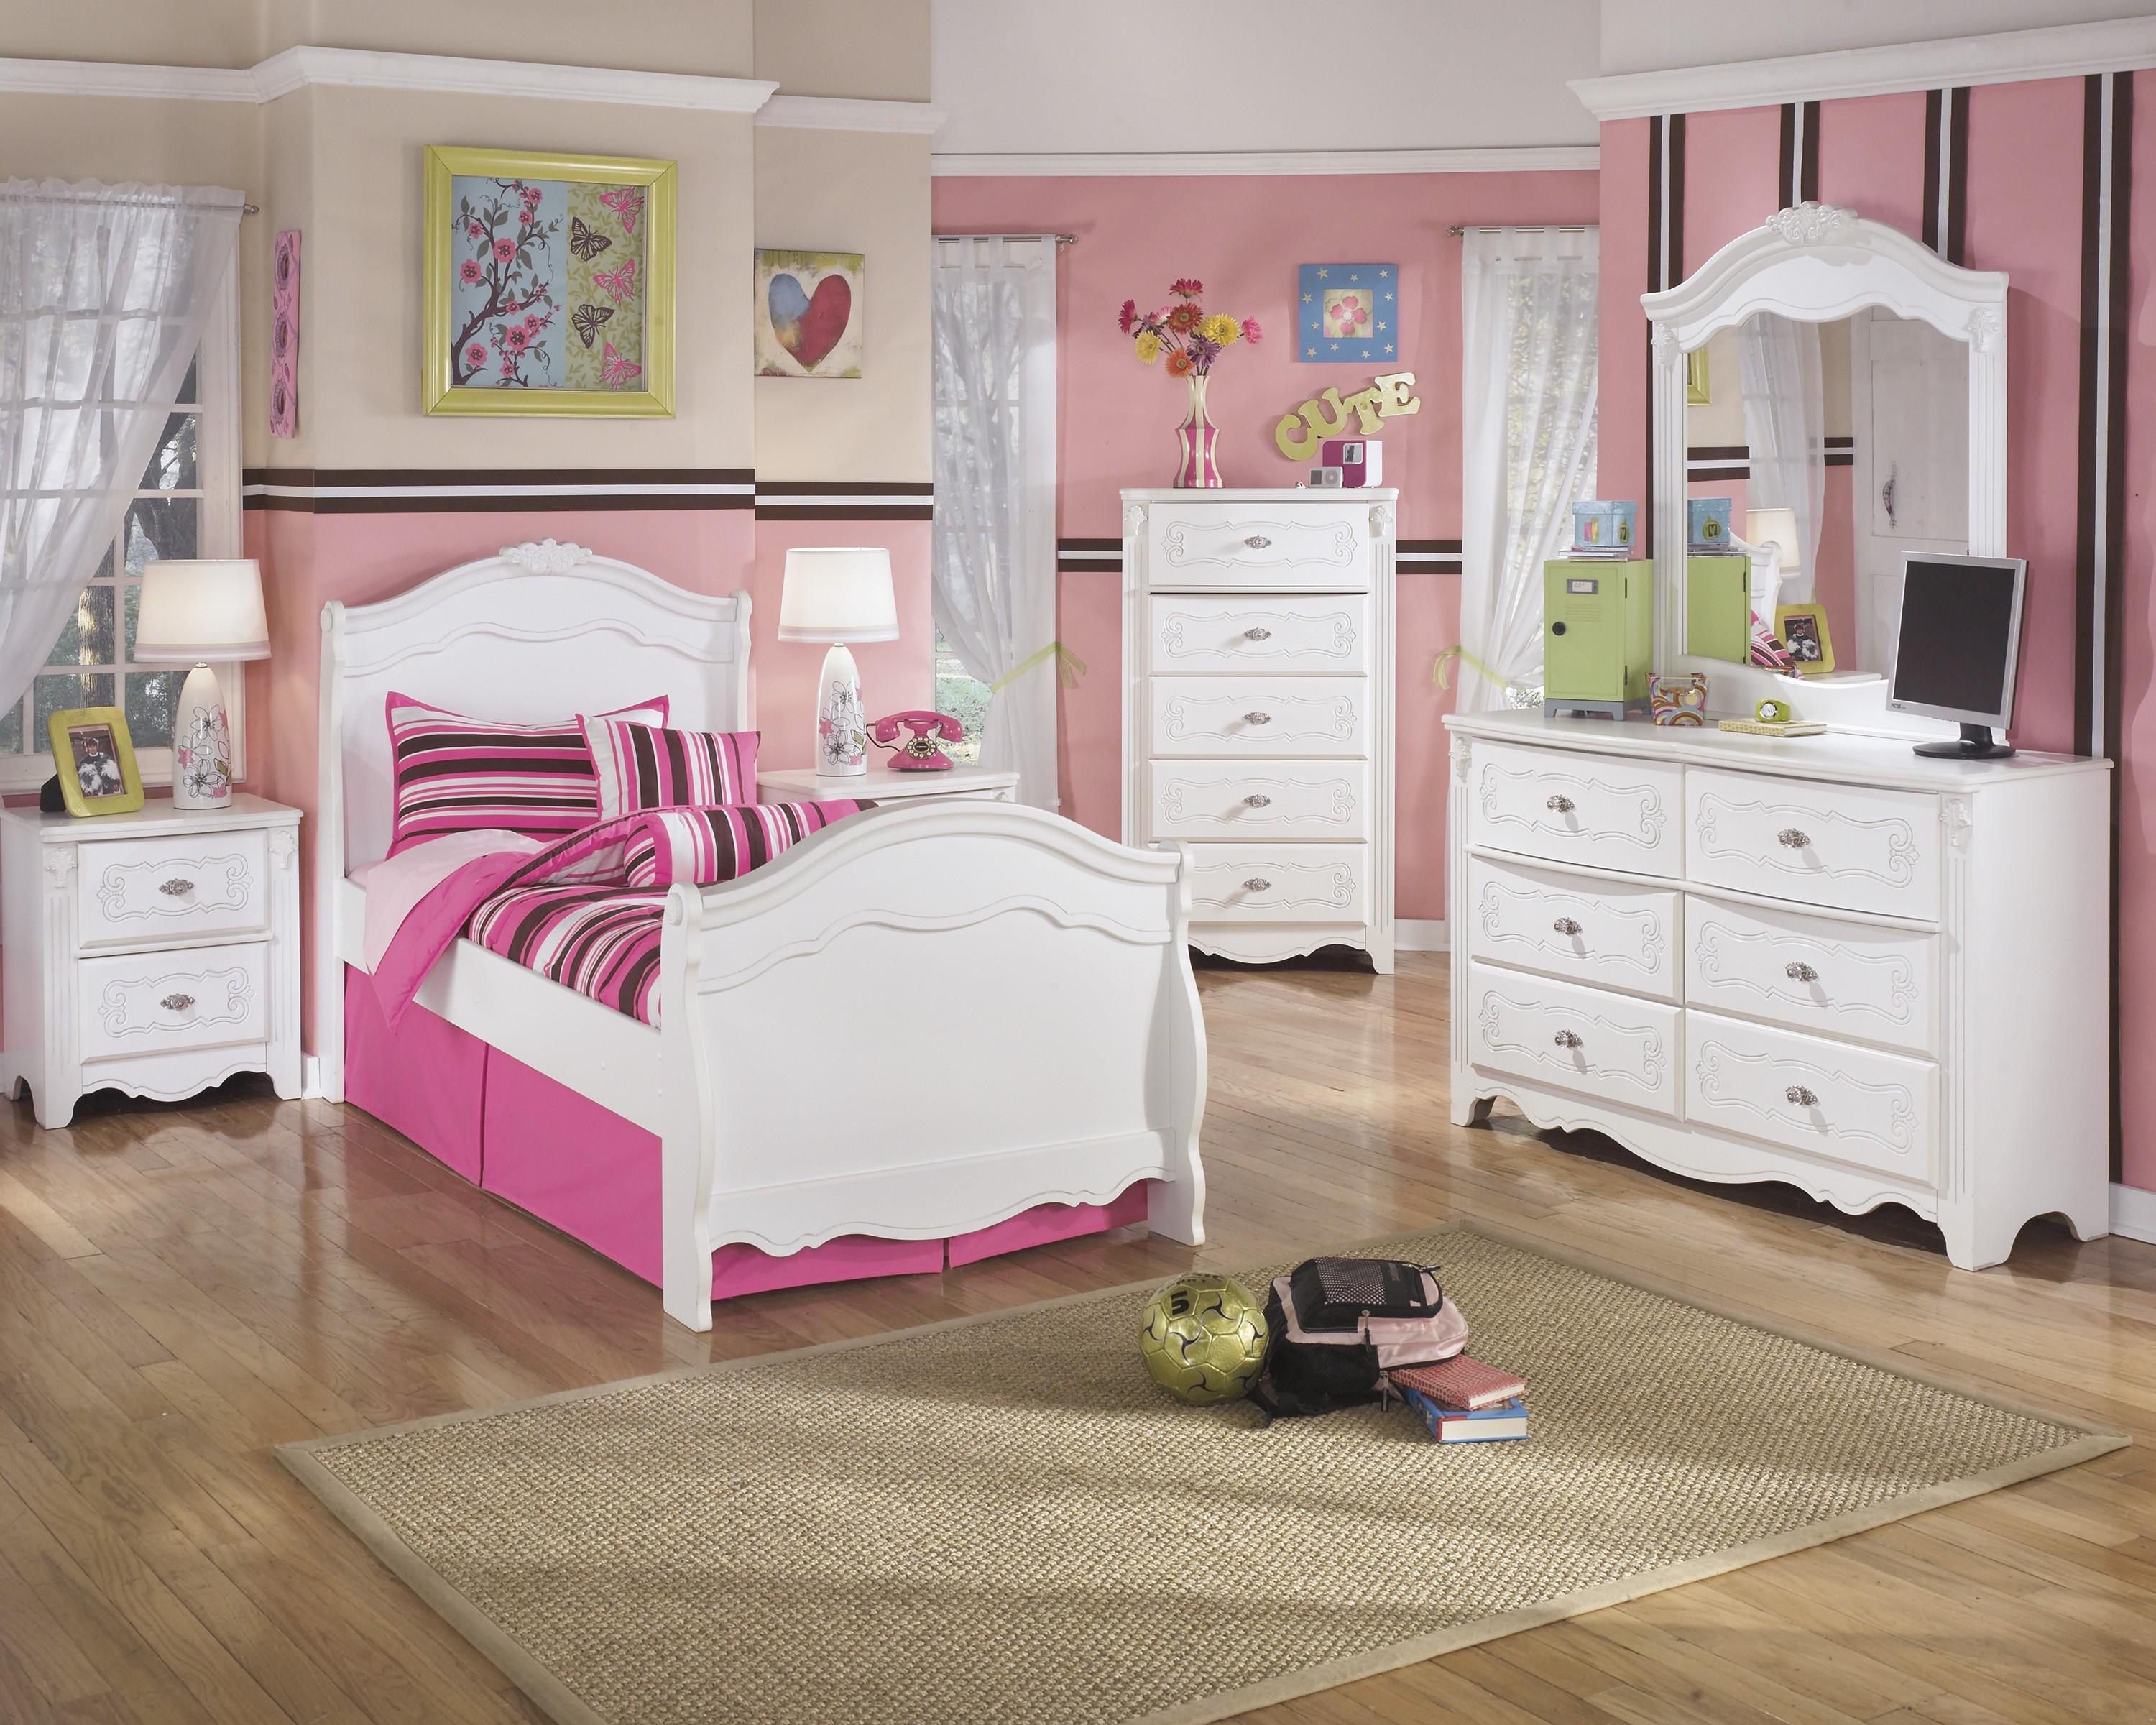 

    
Ashley Exquisite B188Y Full Size Sleigh Bedroom Set 6pcs in White
